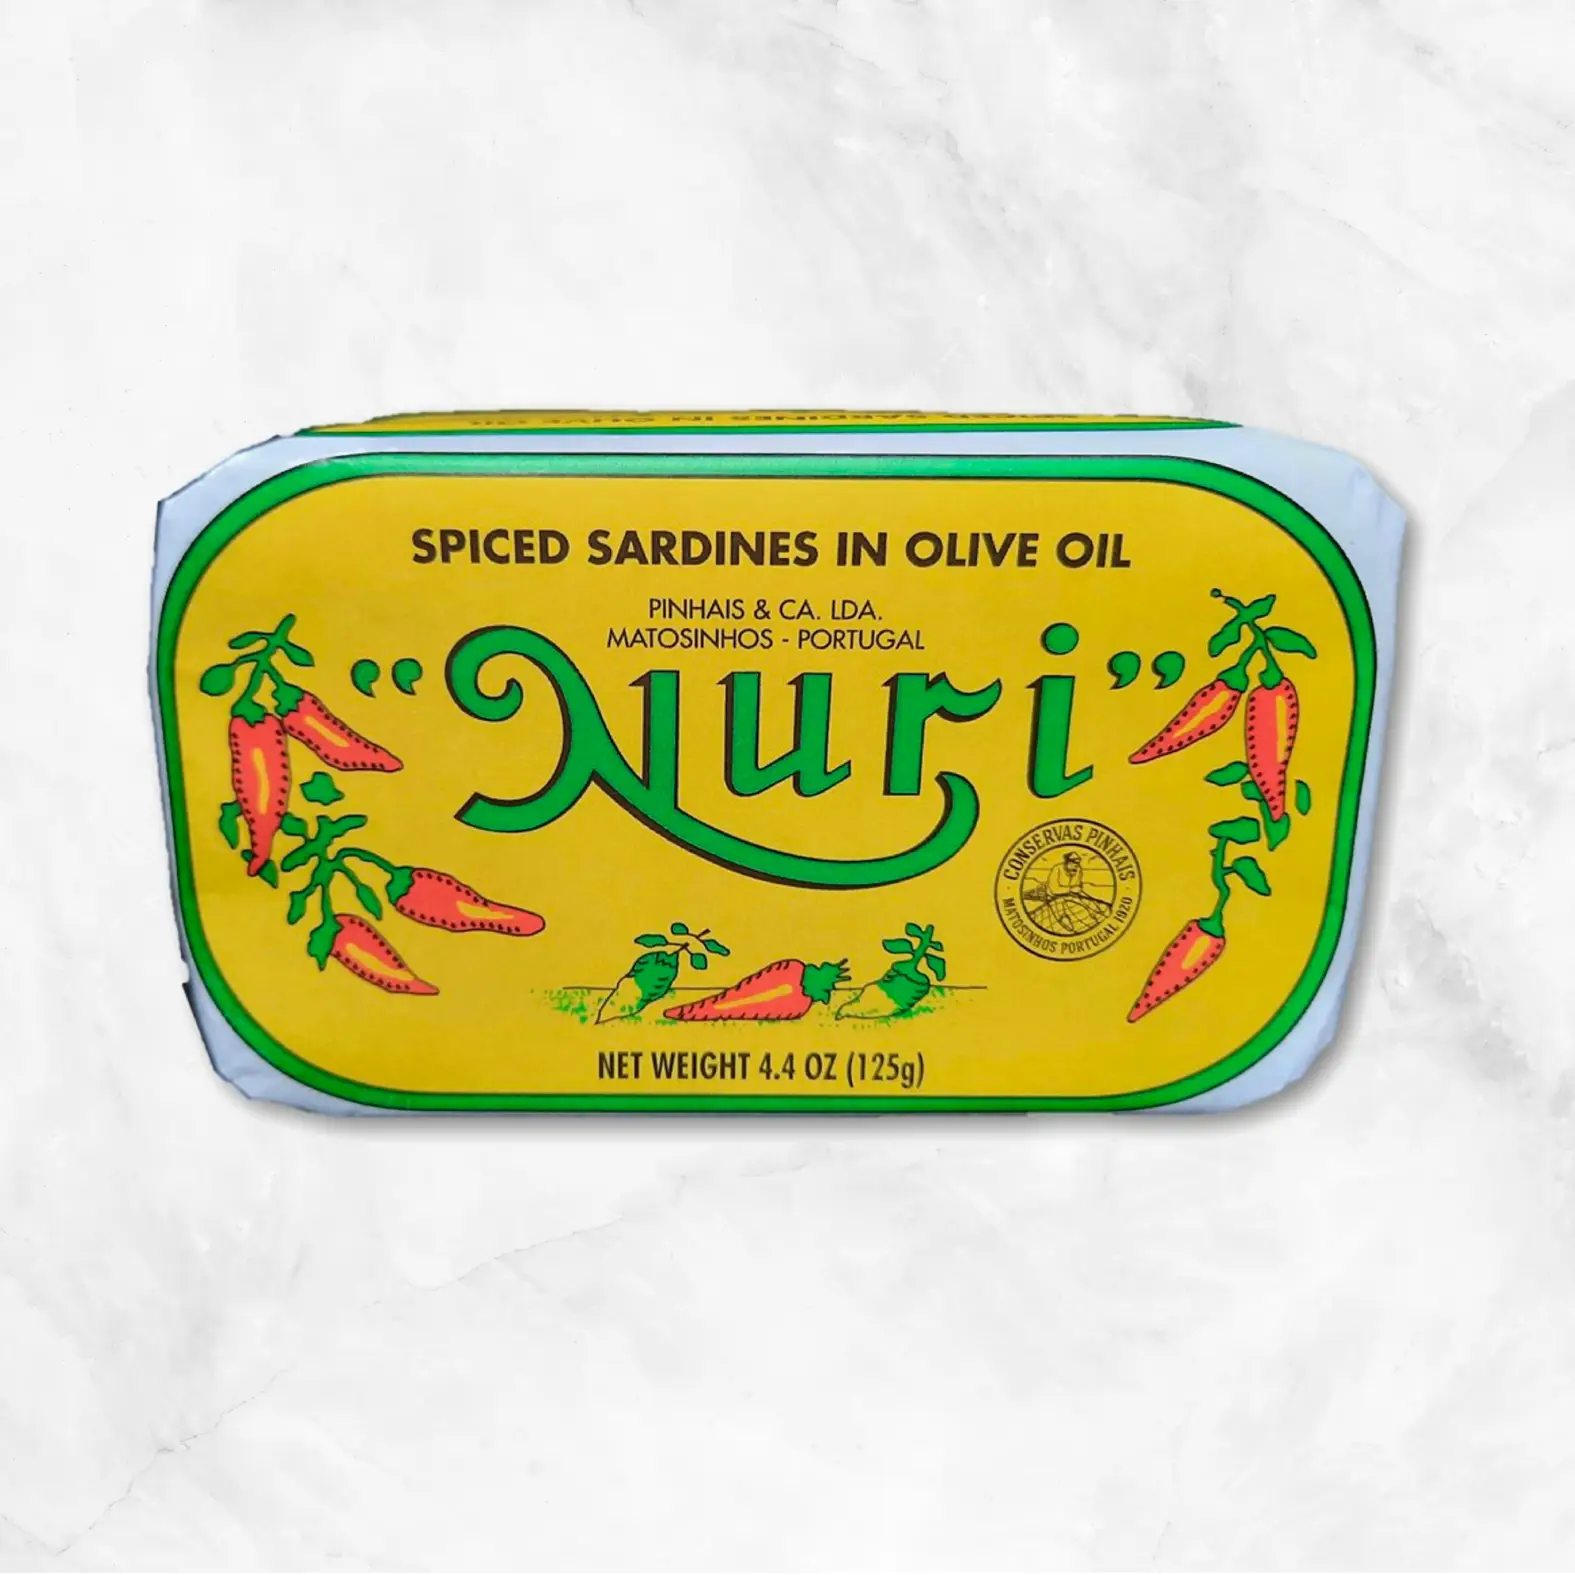 Spiced Sardines in Olive Oil Delivery